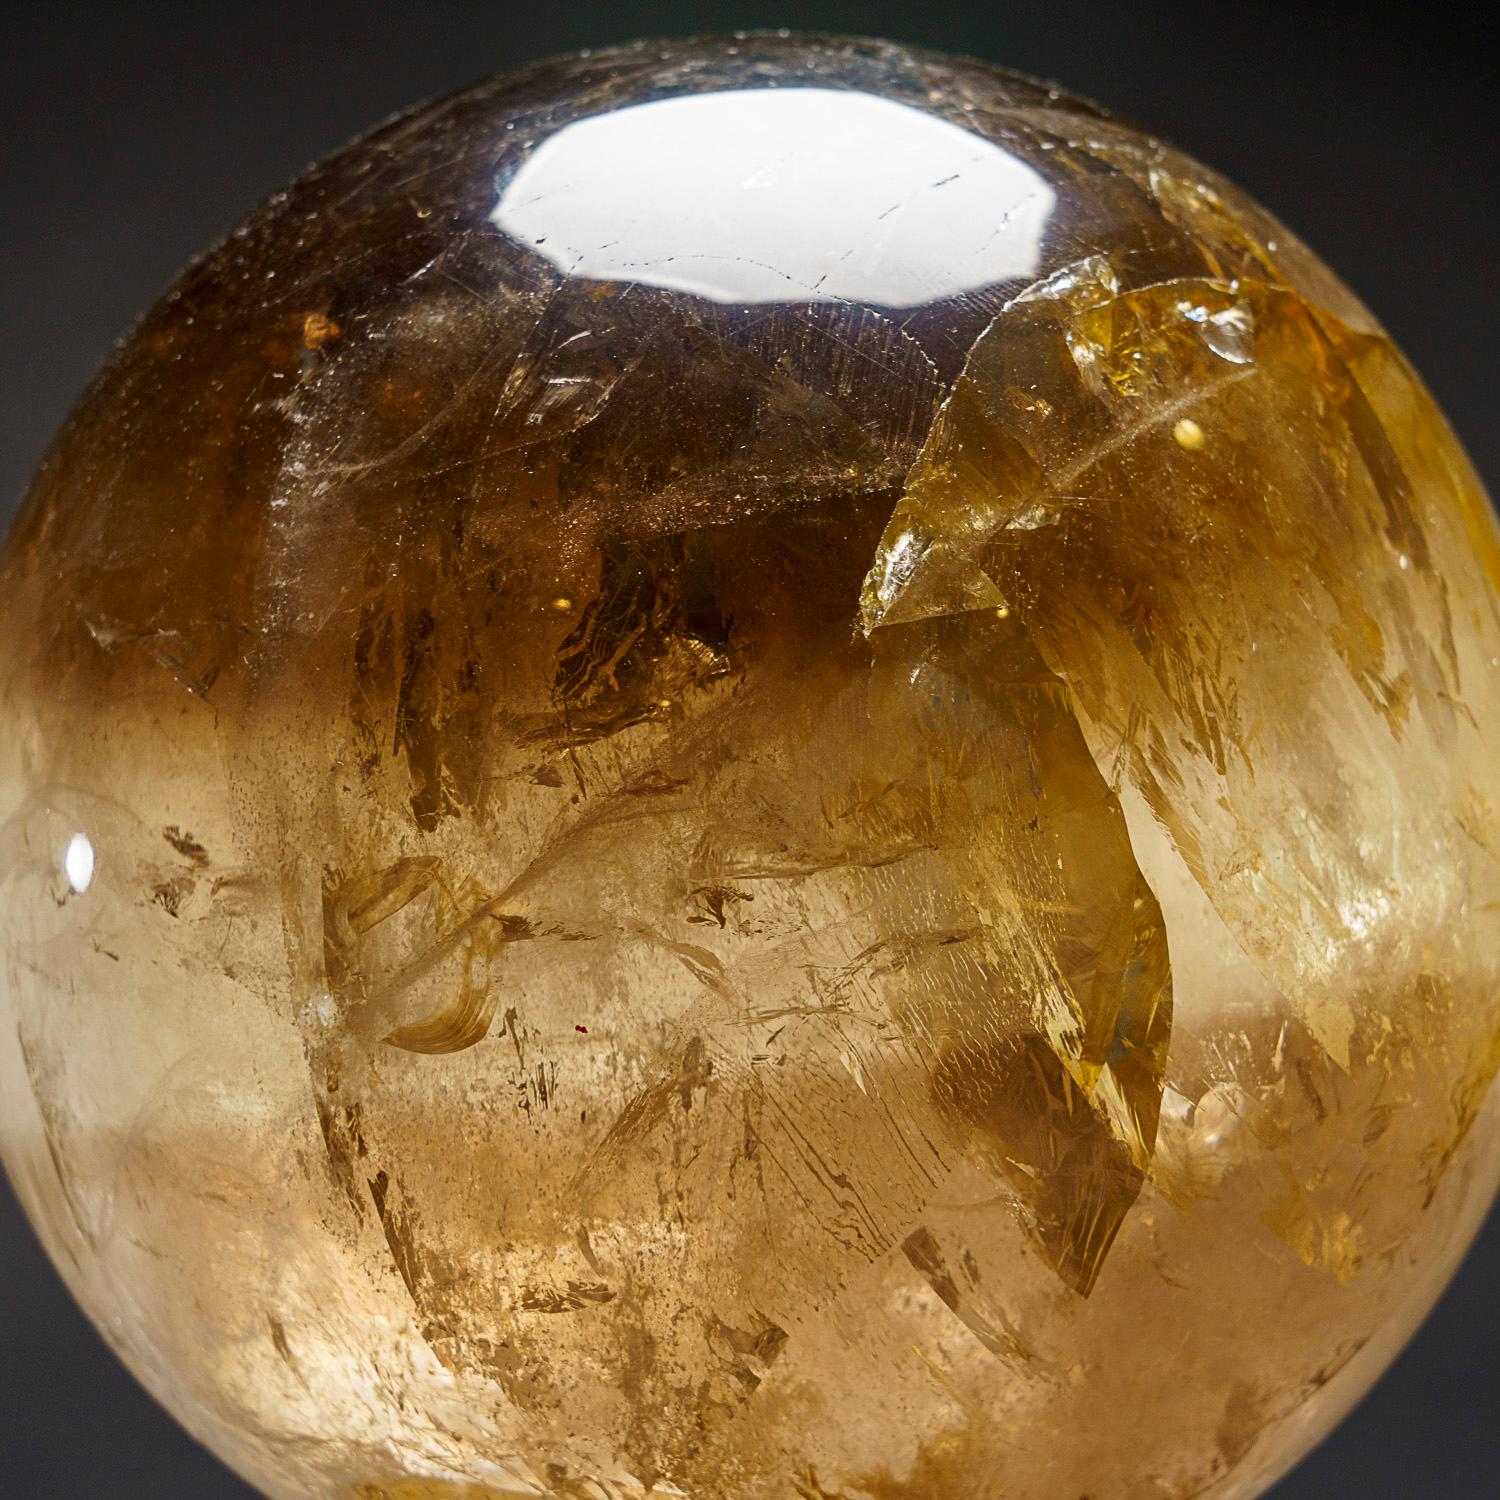 Contemporary Genuine Polished Smoky Quartz Sphere from Brazil (14 lbs) For Sale